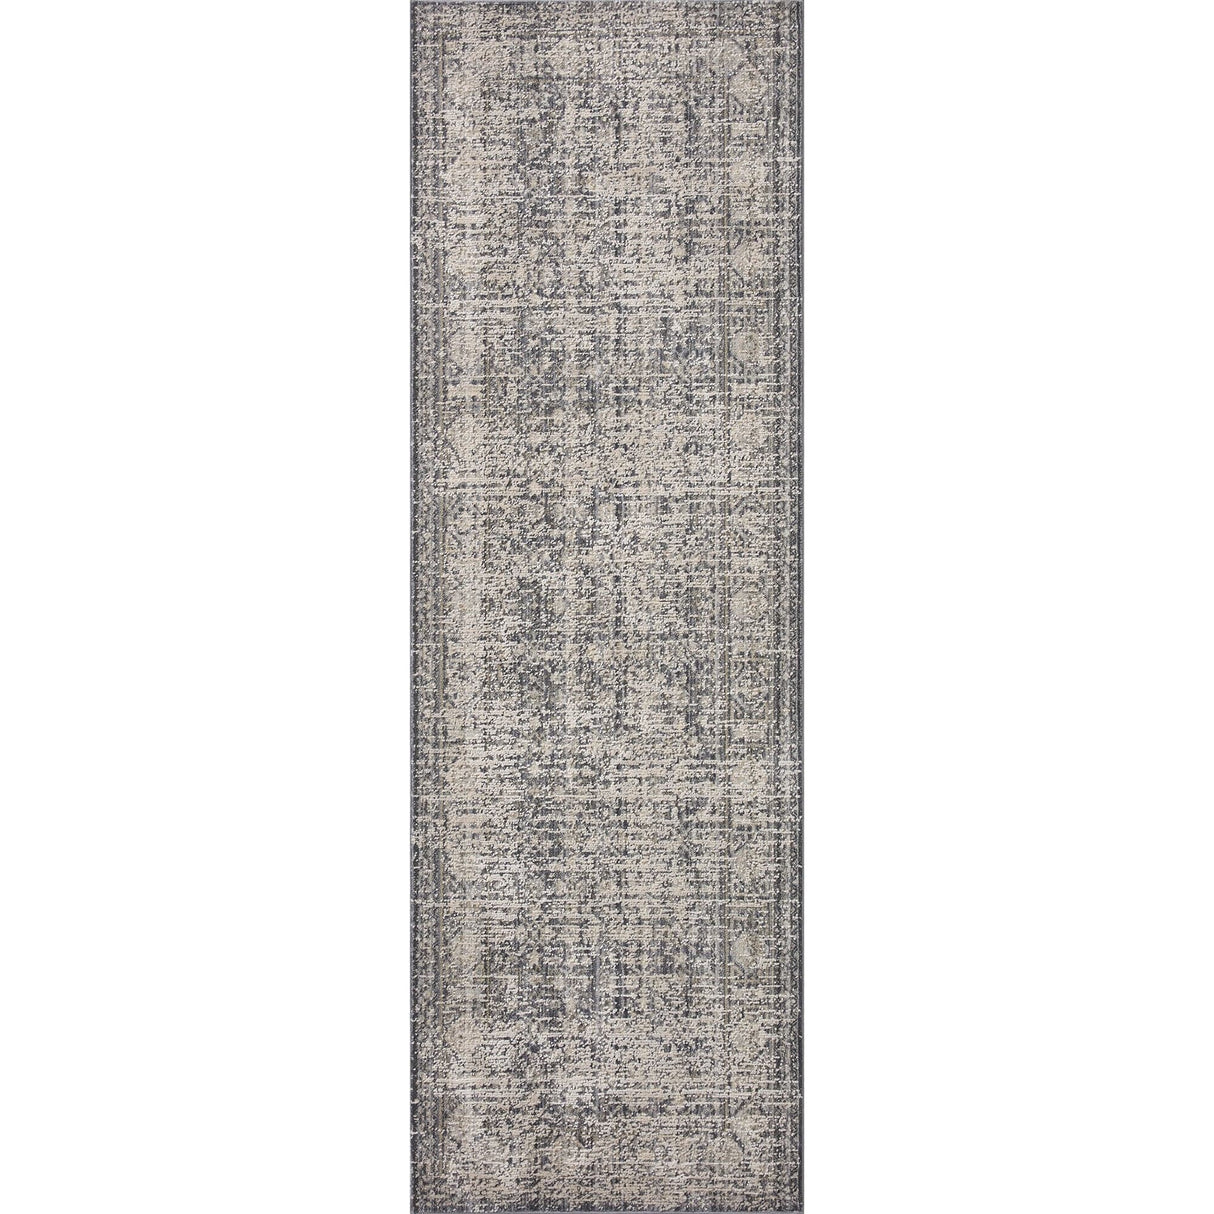 Amber Lewis Alie Rug Rugs loloi-ALIEALE-03CCDV-2779